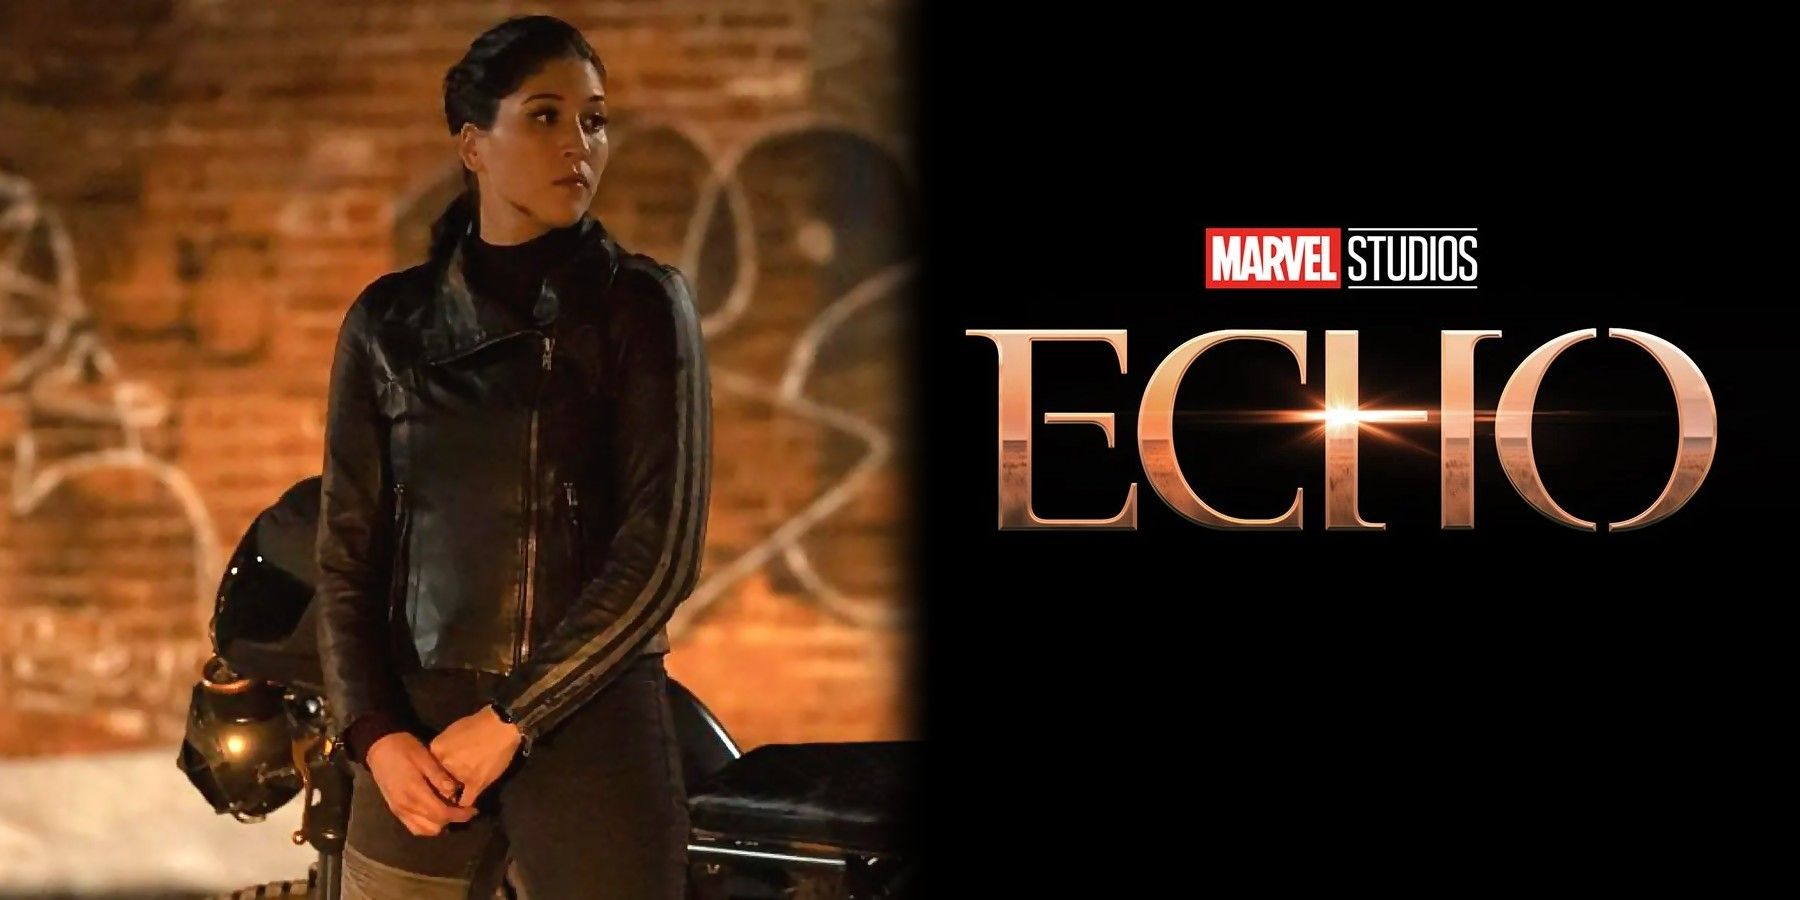 Marvel Studios' Echo Spinoff Series Release Date Delayed To Late 2023